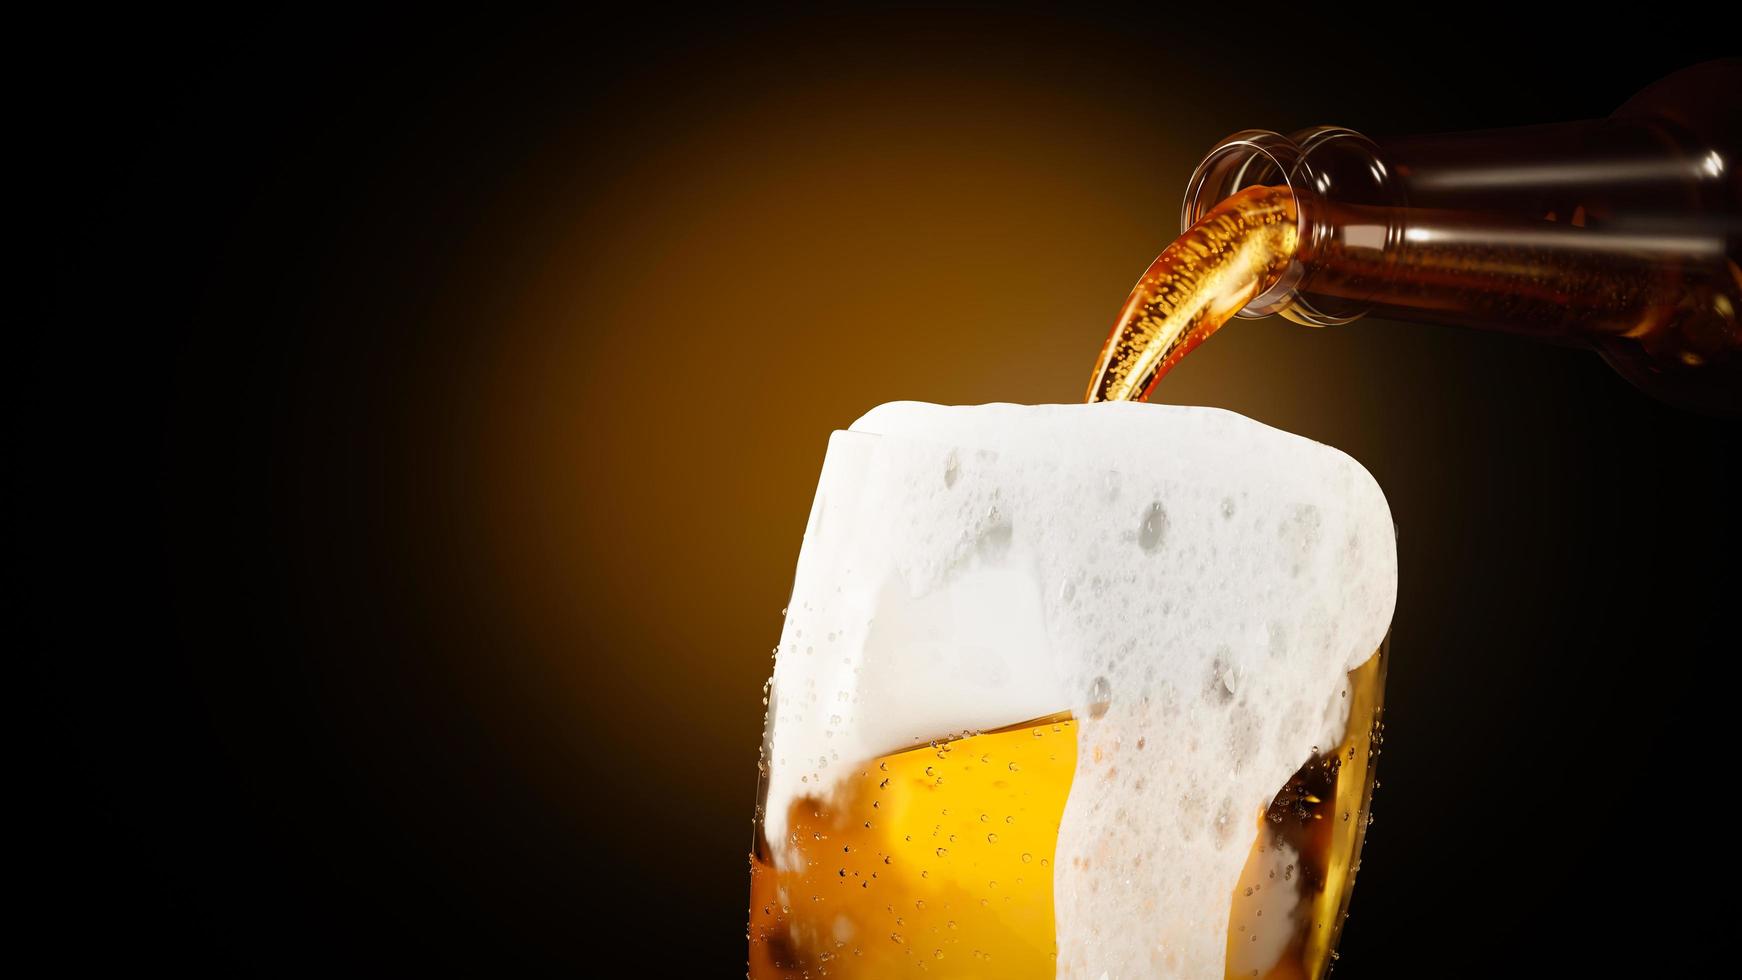 pour beer into a glass to fill And there are many more beer foams until the glass overflows. Pour the beer foam over the glass. Golden orange light background. 3D rendering photo